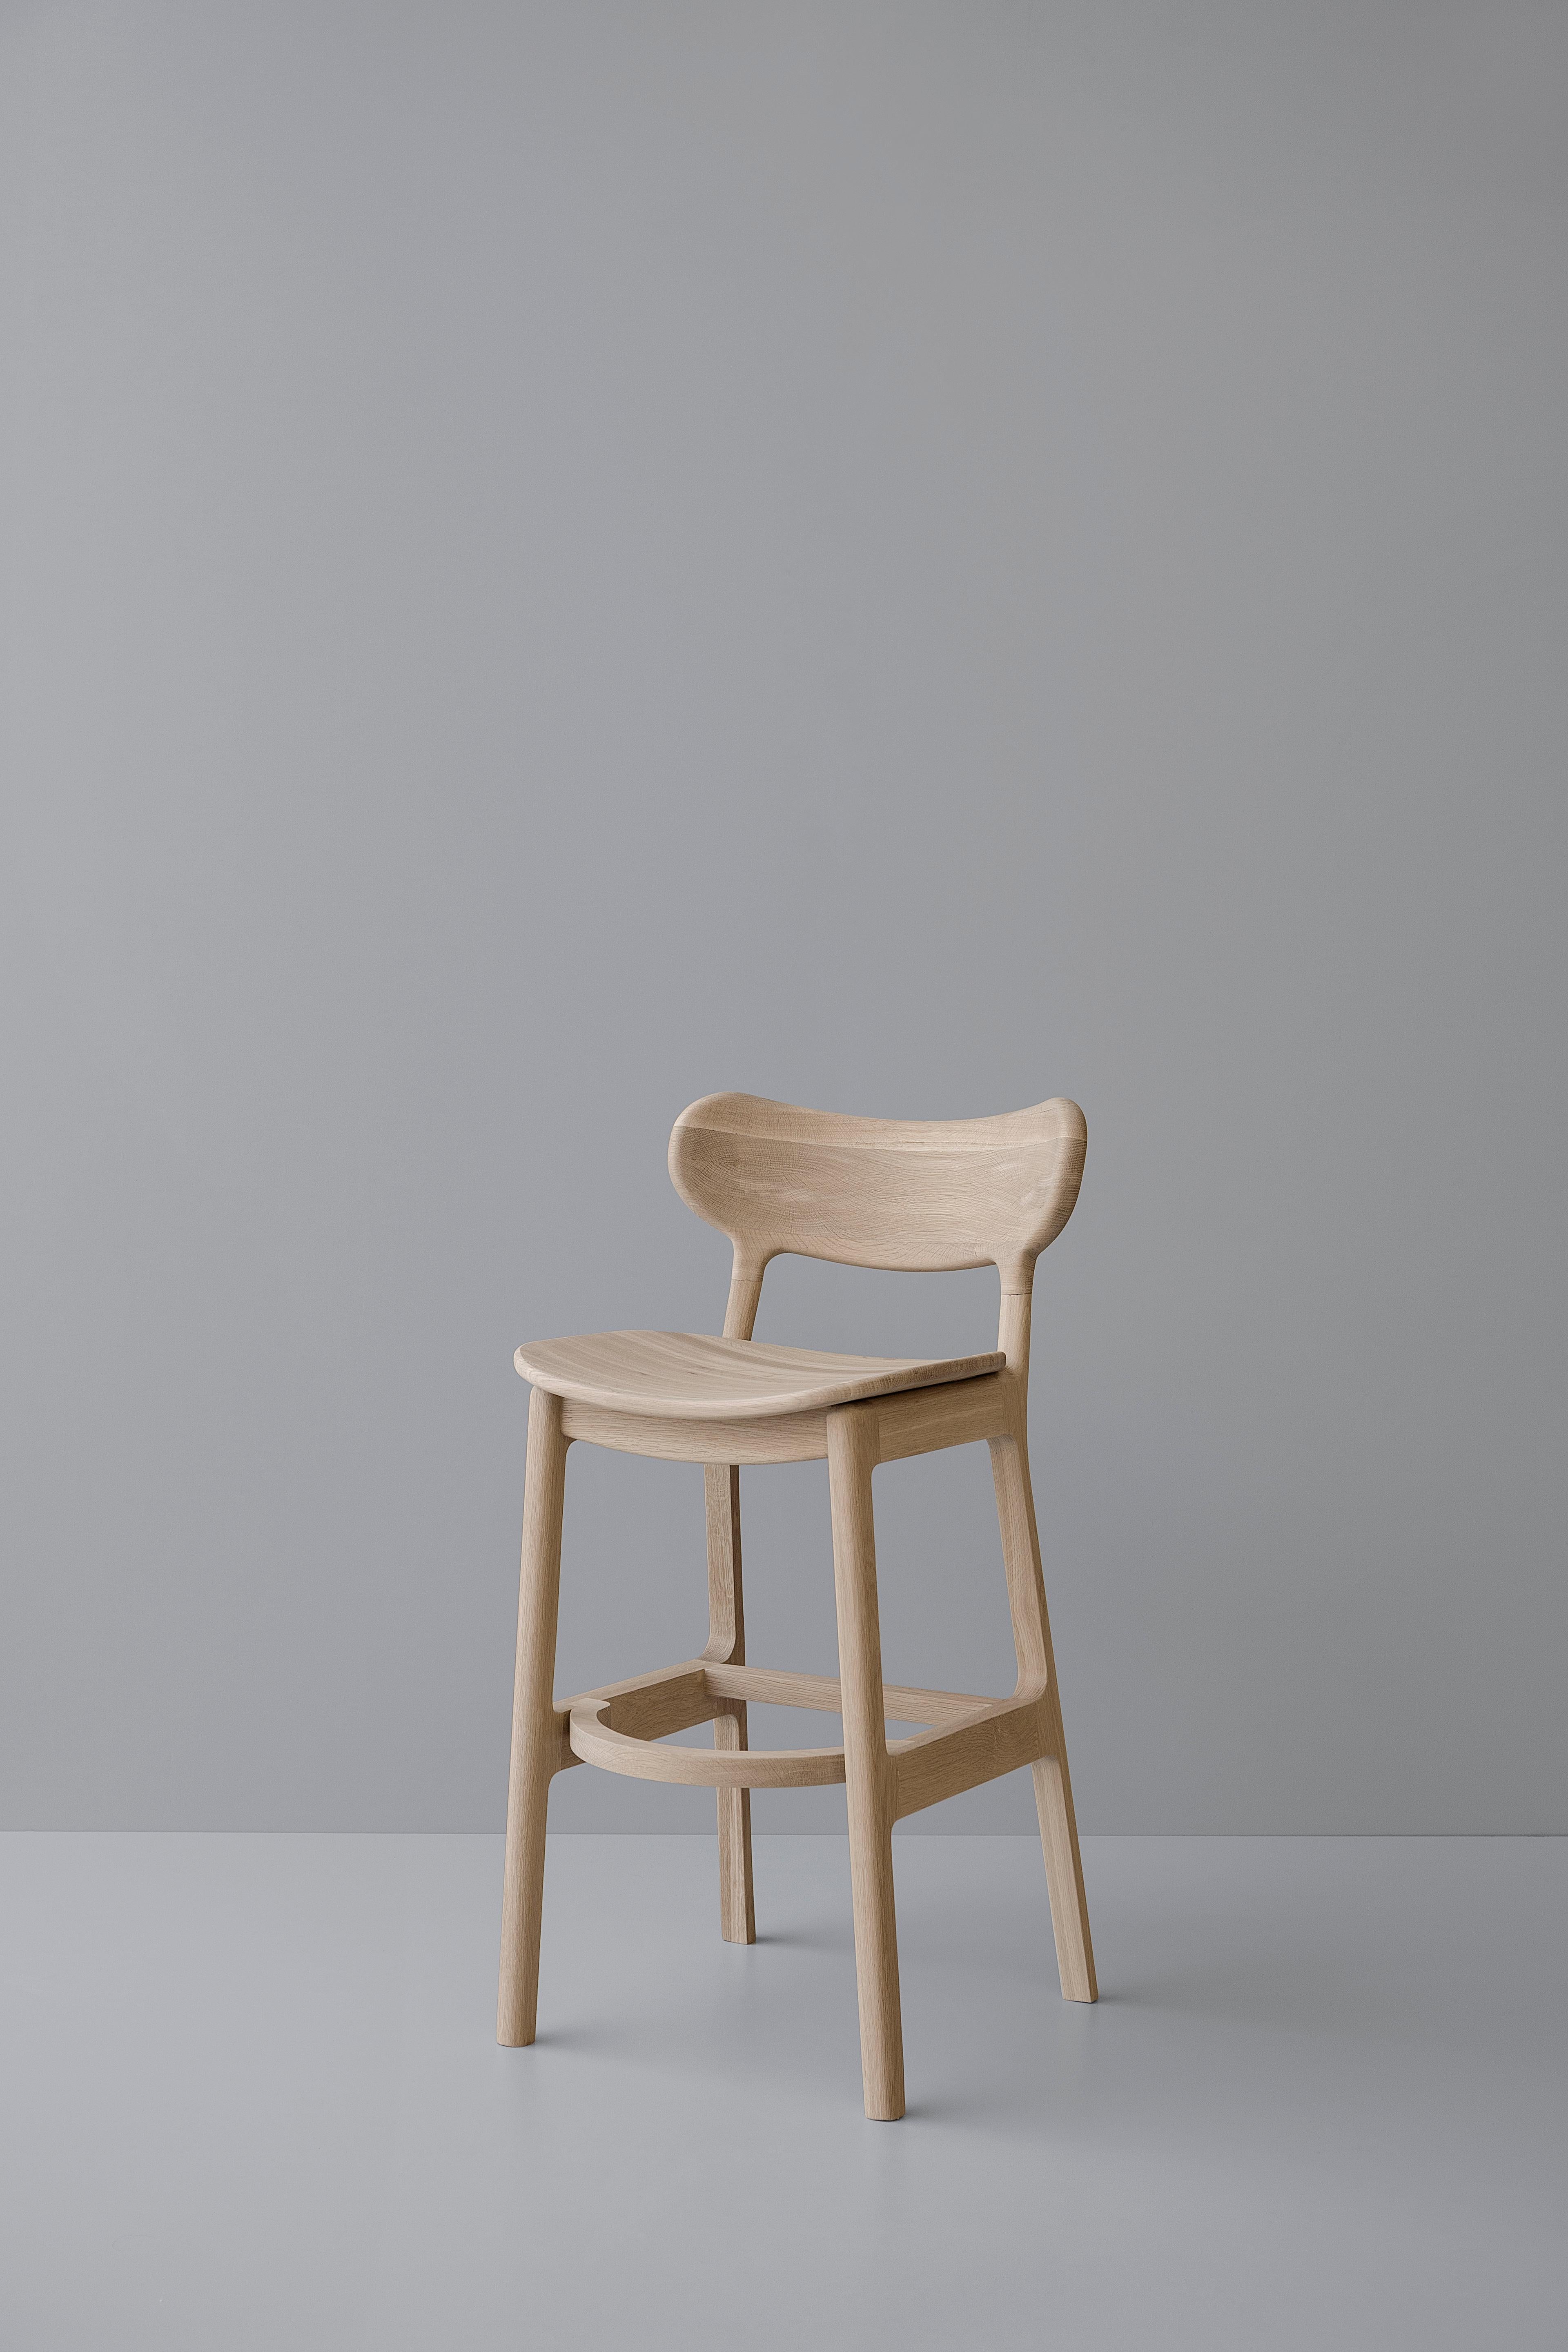 Trasiego barstool by Arturo Verástegui
Dimensions: D 47 x W 53 x H 99 cm
Materials: oak wood.

High dining chair made of natural white oak.

Sebastián Angeles is an Industrial Designer originally from Mexico City who graduated from the Anáhuac